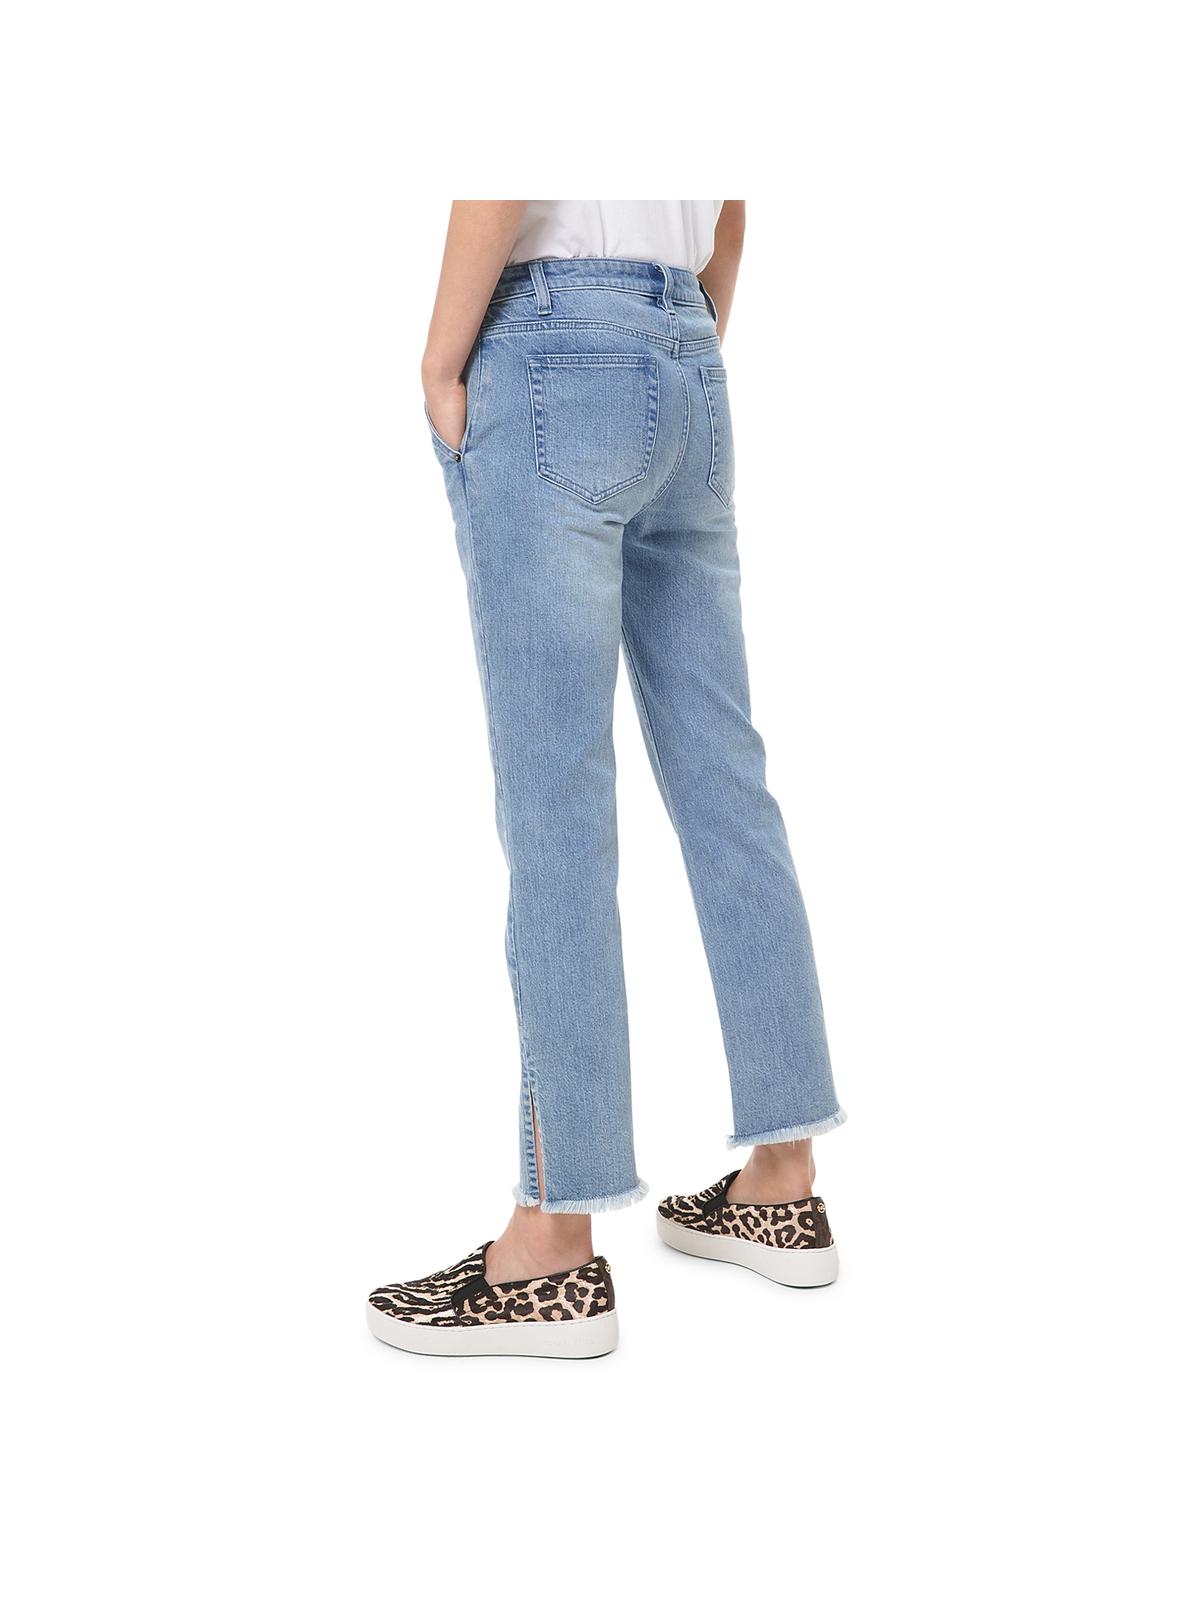 MICHAEL Michael Kors Womens Denim High Rise Cropped Jeans - image 2 of 2